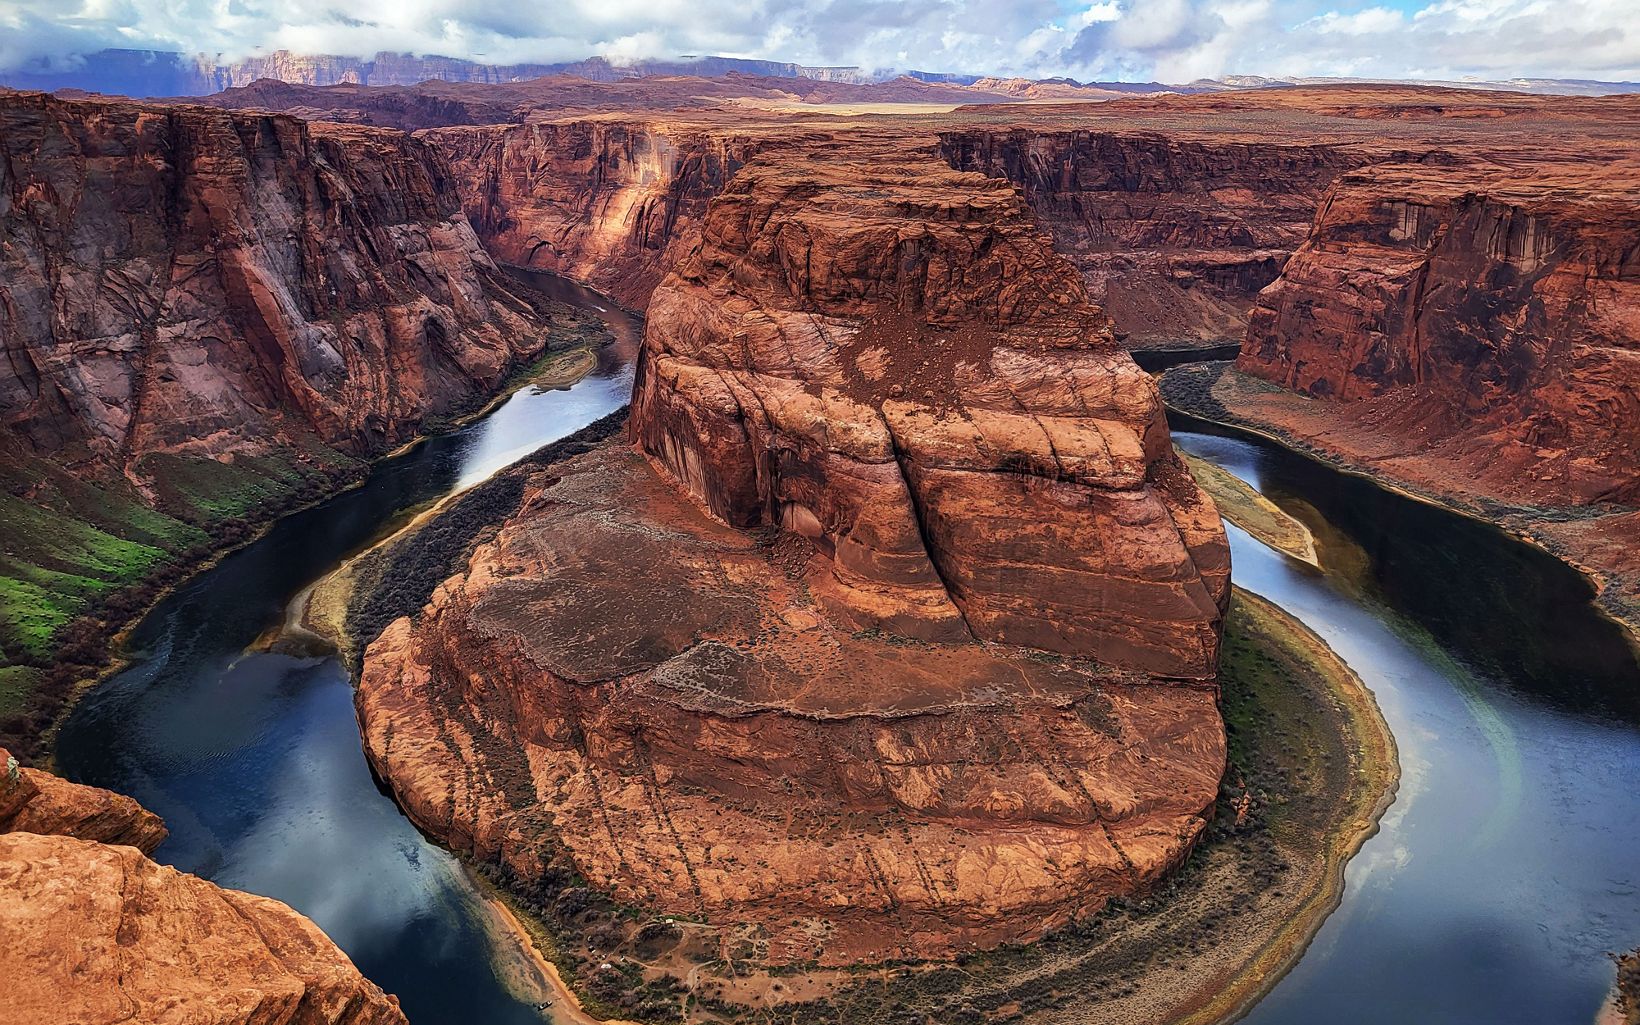 Honorable Mention "Horseshoe Bend during a semi-cloudy day" © Faiza Tasnim